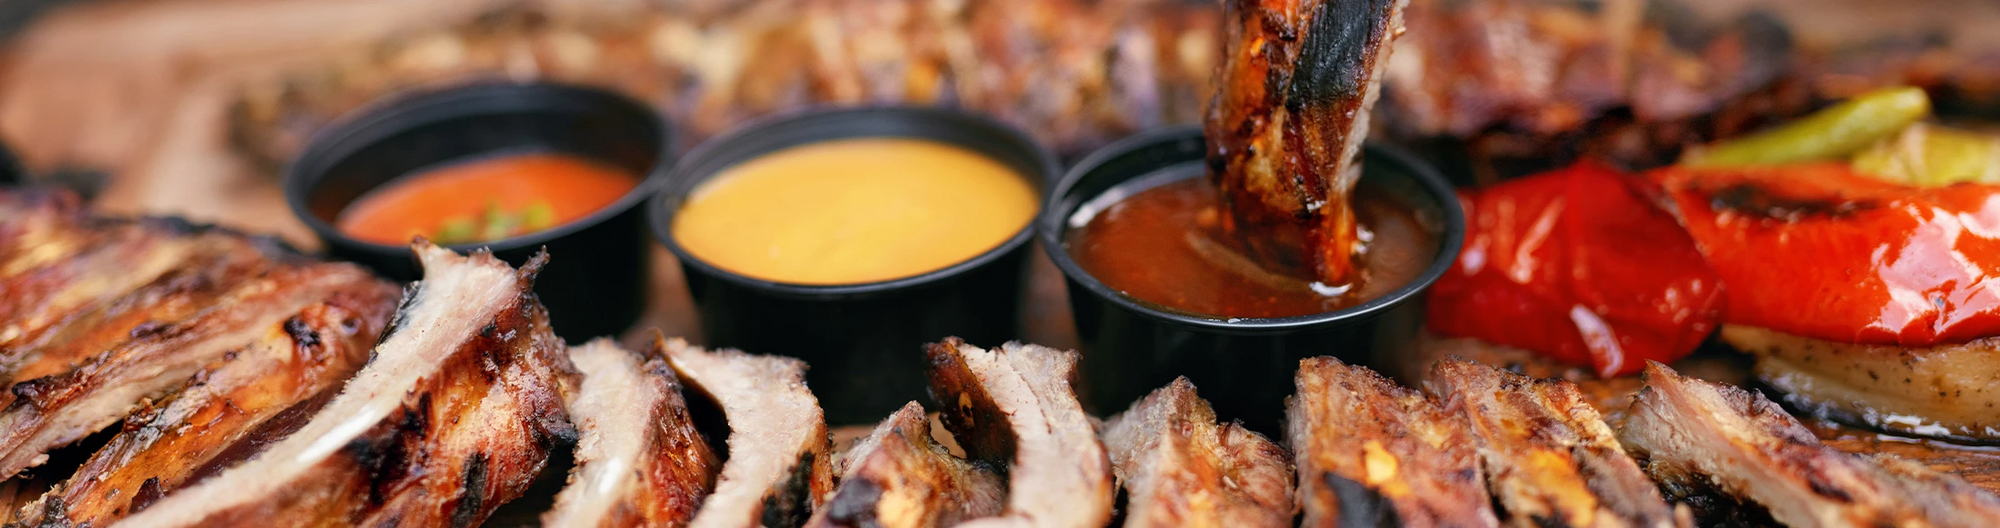 BBQ ribs and dipping sauces.